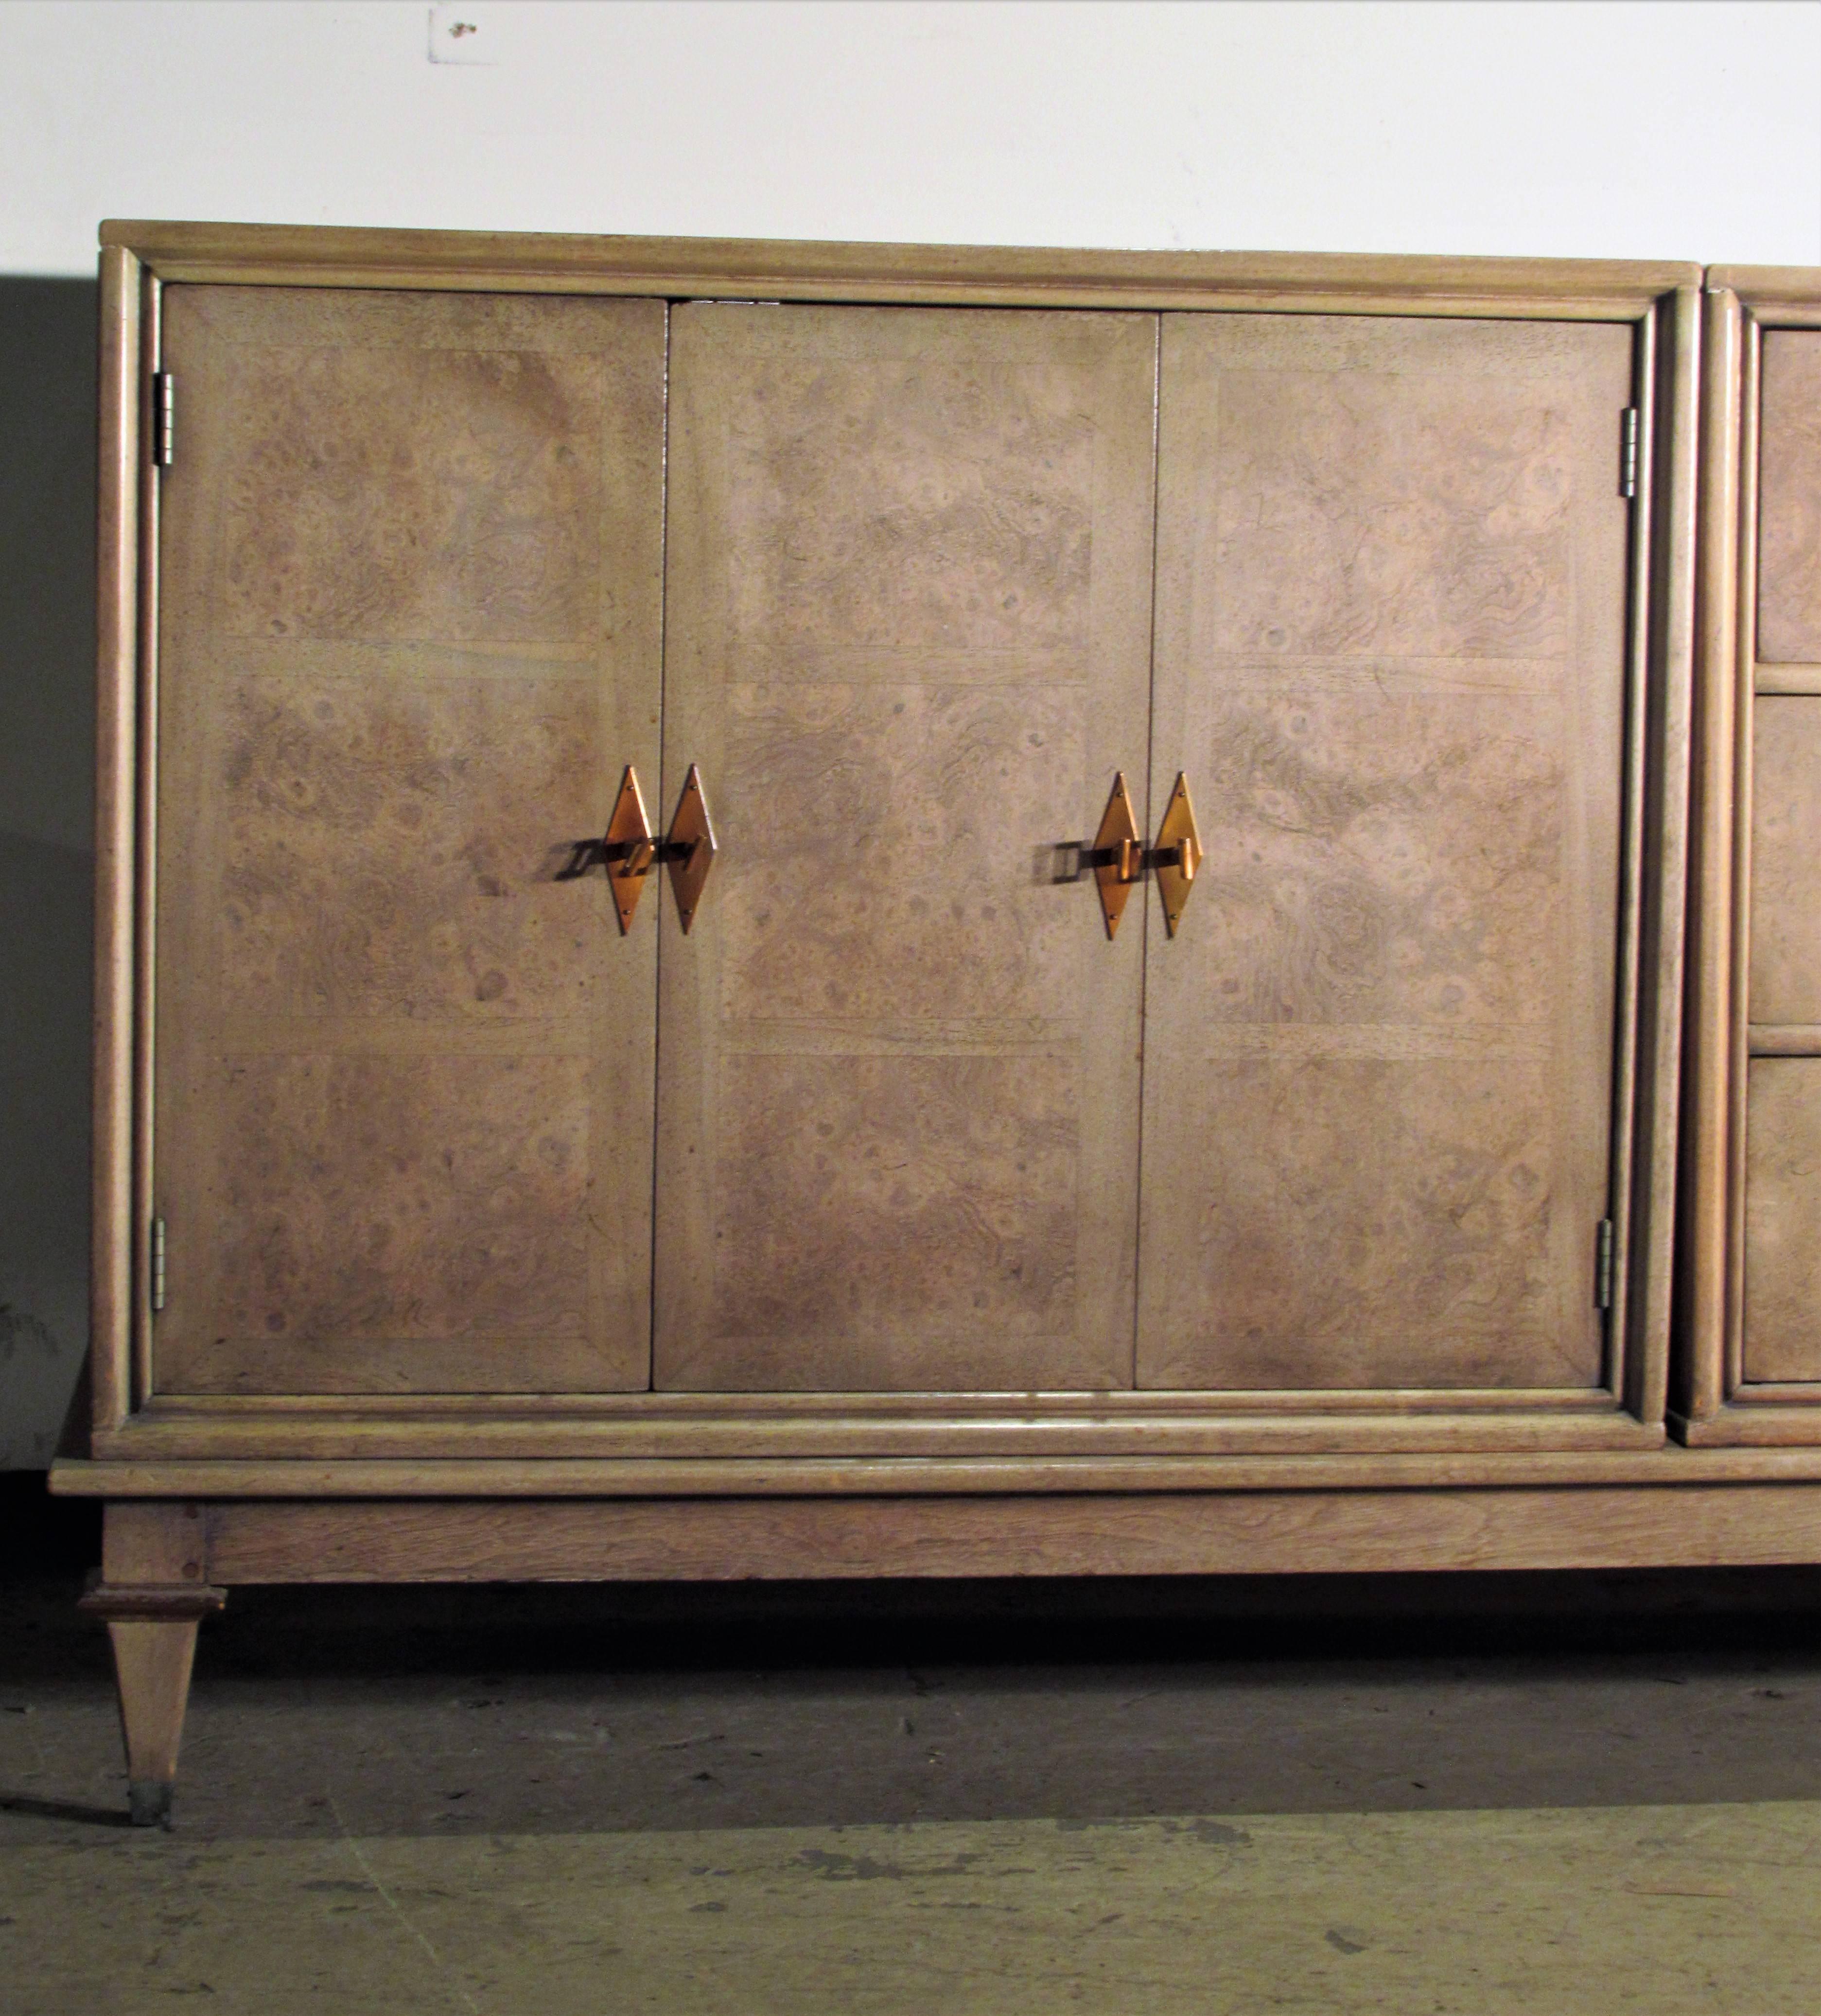 An amboyna burl and inlaid wood credenza with original pale cerused parchment vellum finish by Bernhard Rohne for Mastercraft - there are two folding door side cabinets each with four interior sliding drawers (see image 13) surrounding a centre